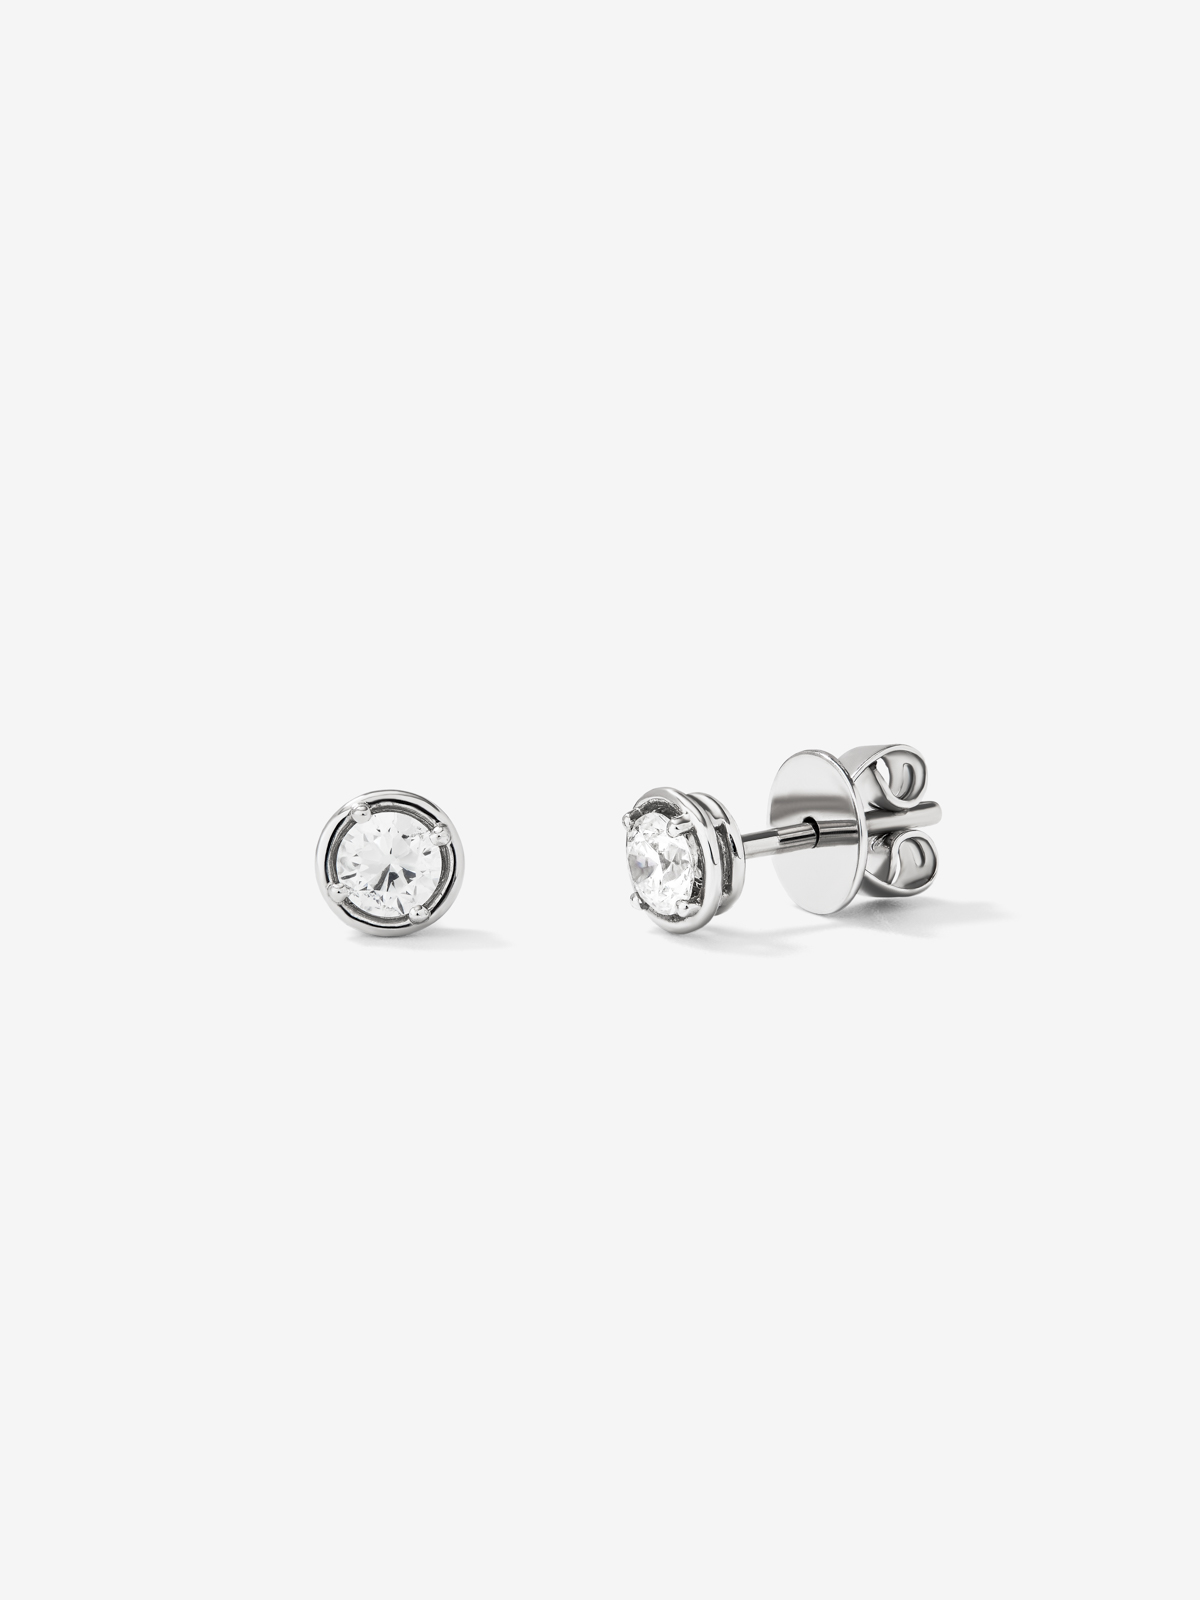 18K white gold earrings with solitaire diamond